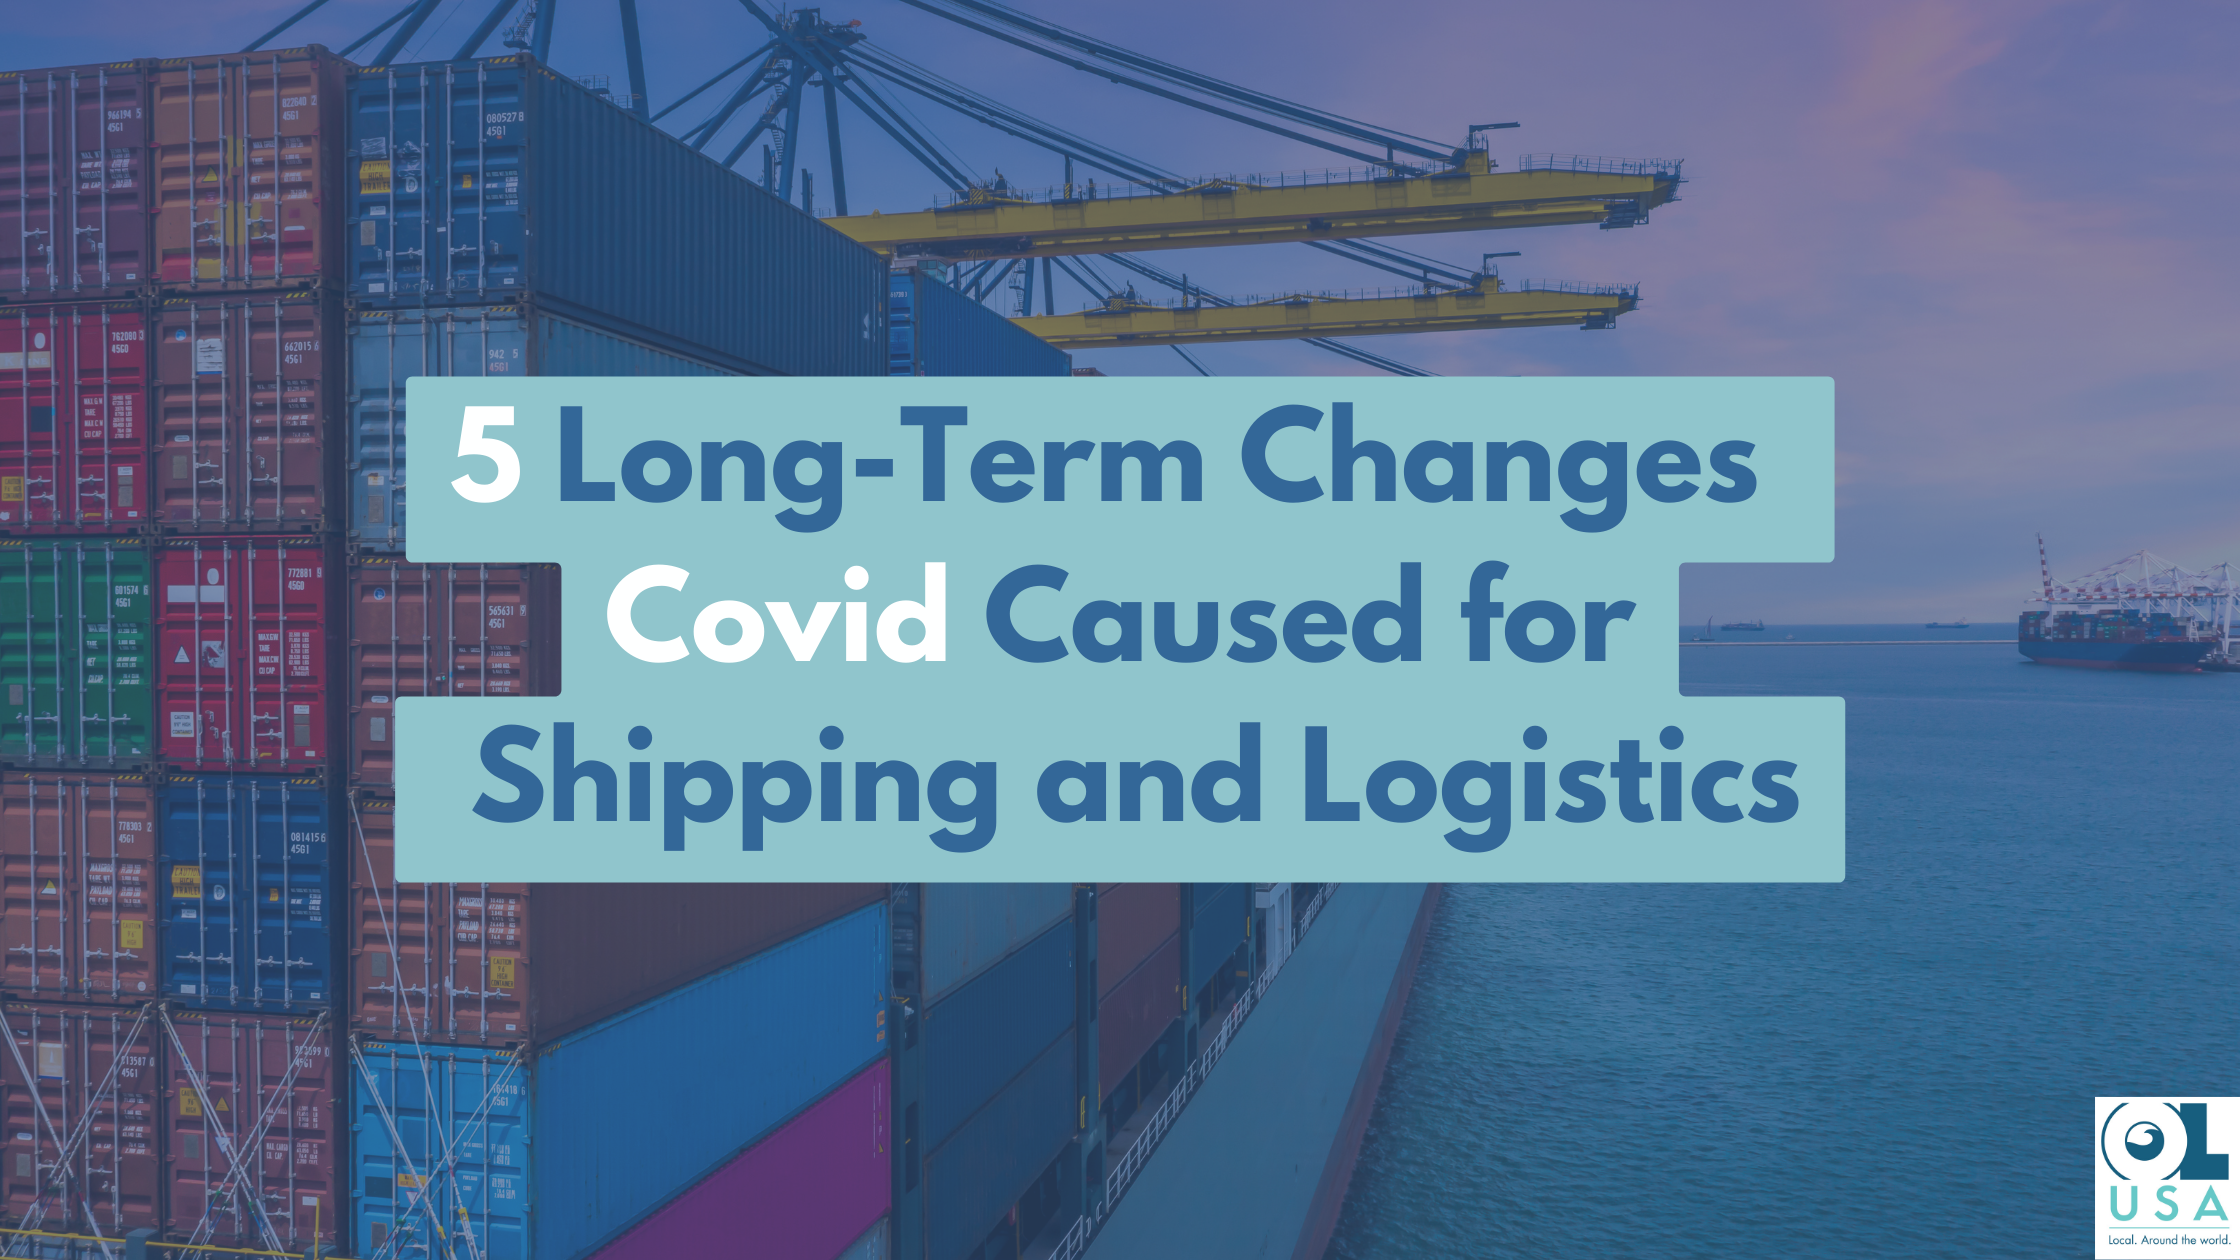 5-long-term-changes-covid-caused-for-shipping-and-logistics-ol-usa